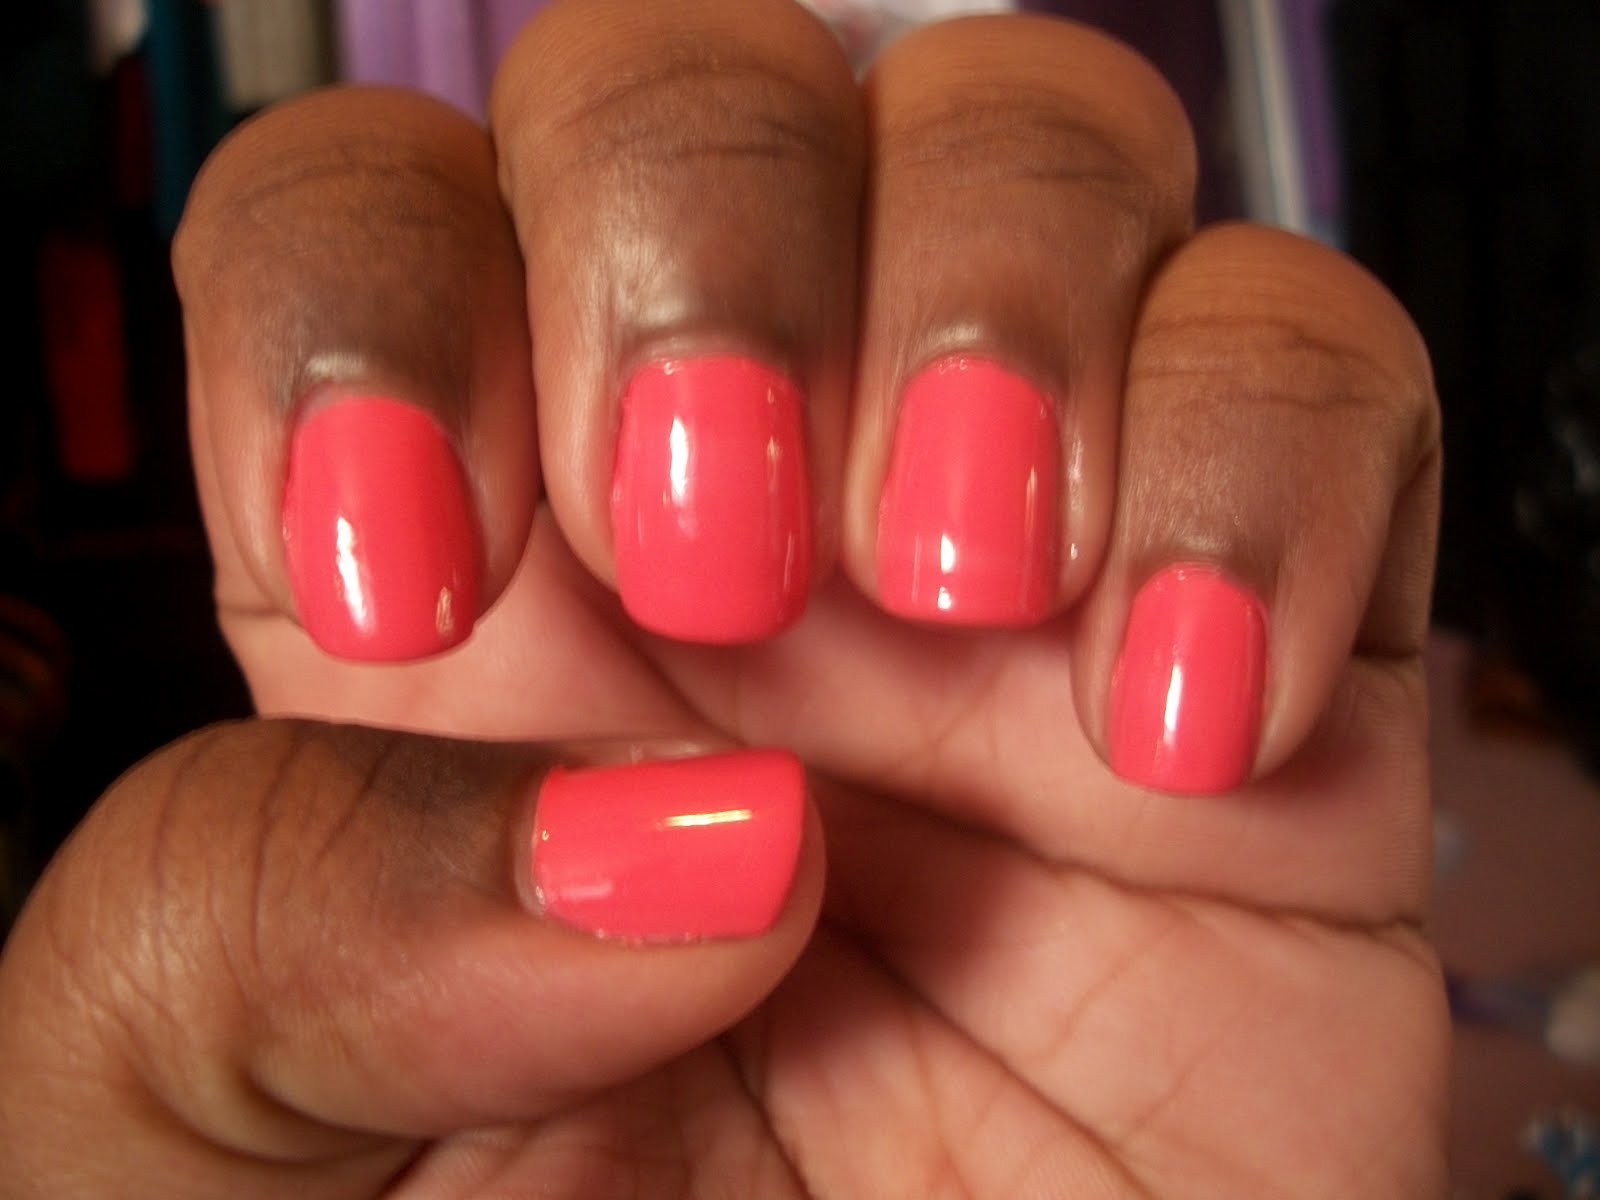 2. Essie Nail Polish in "Coral Reef" - wide 4